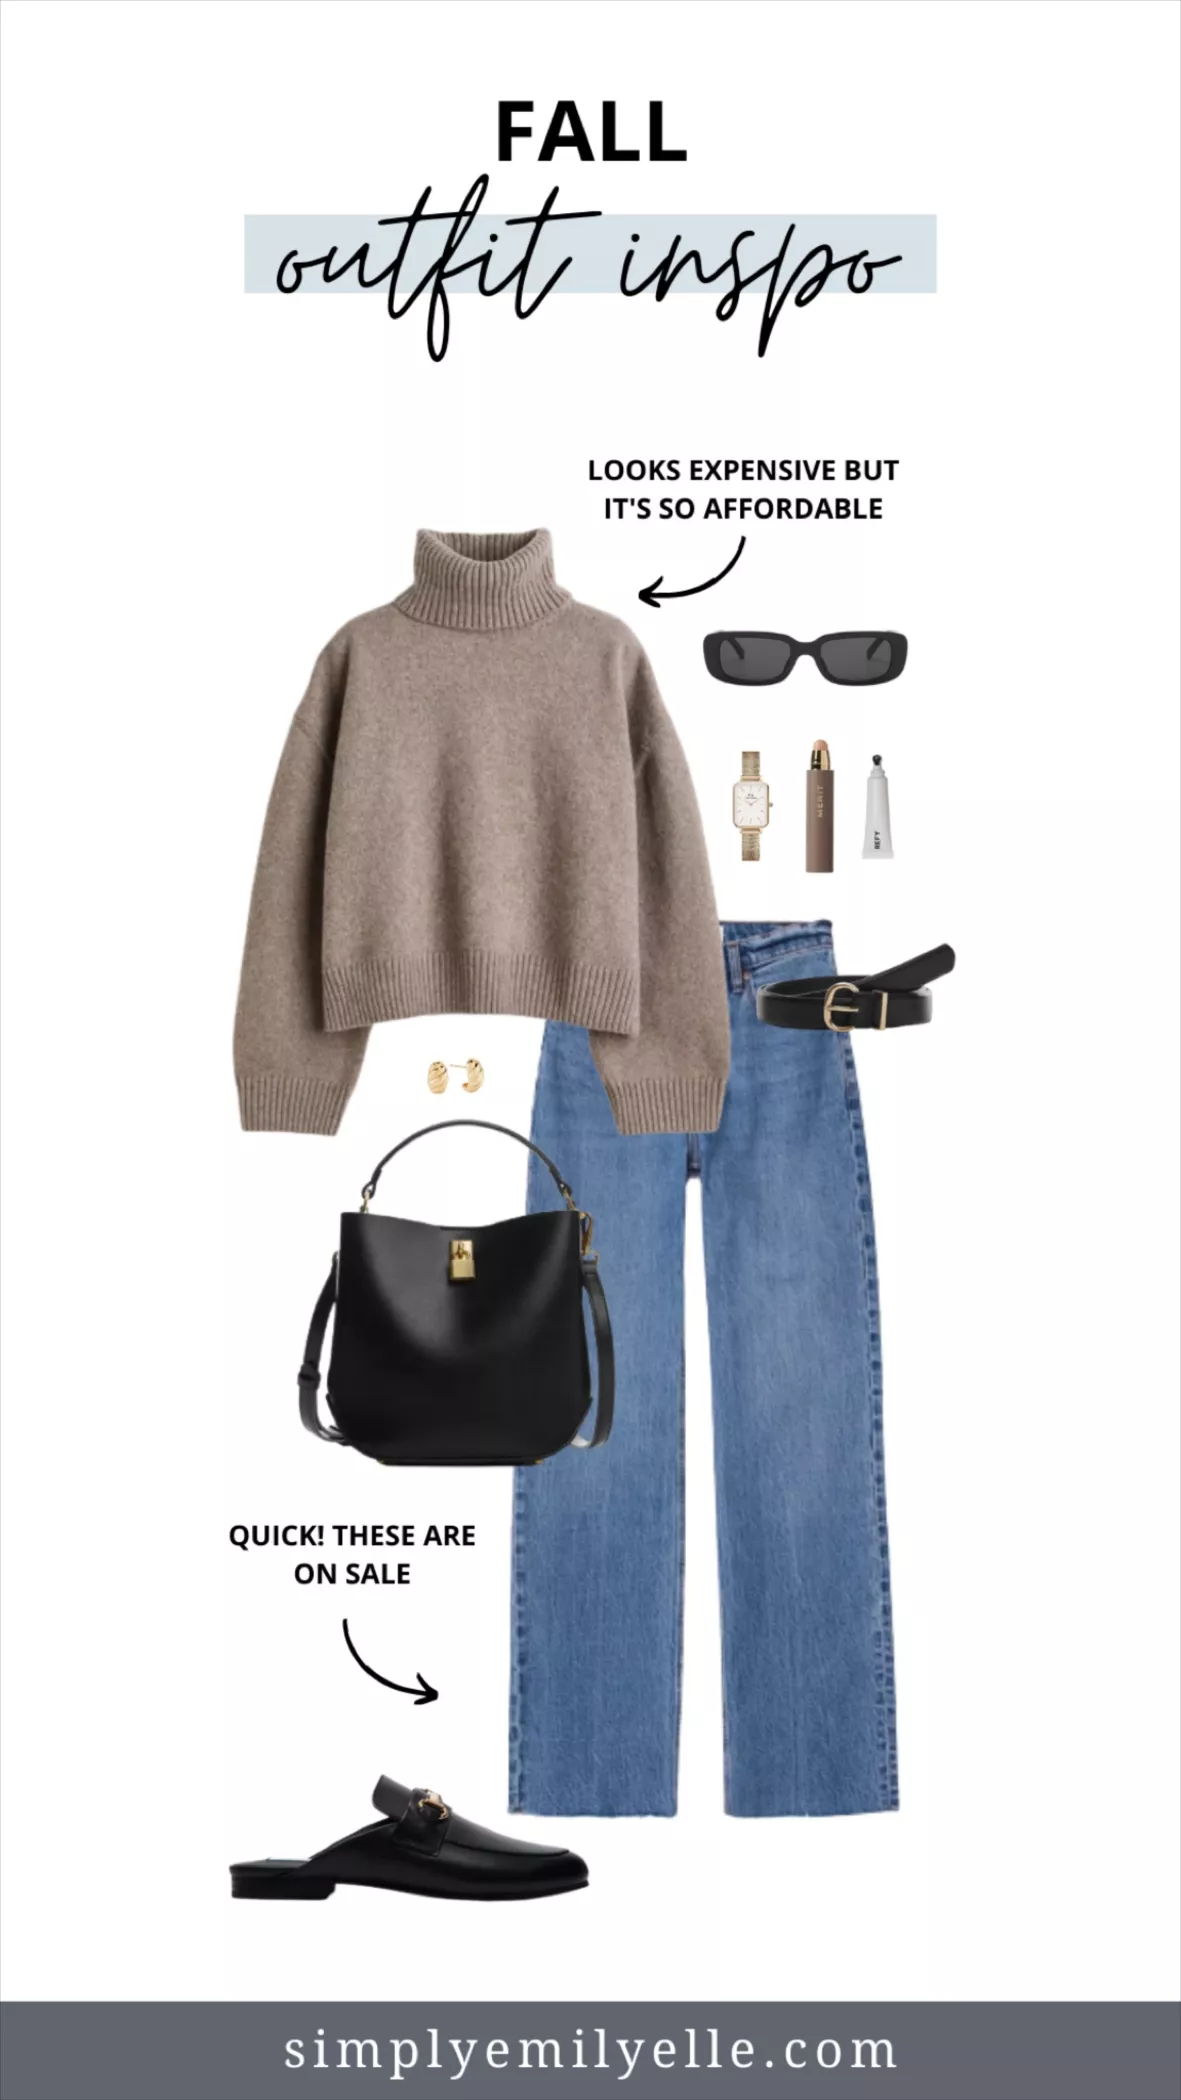 Fall Outfits  Fashion outfits, Fashion inspo outfits, Casual chic outfit